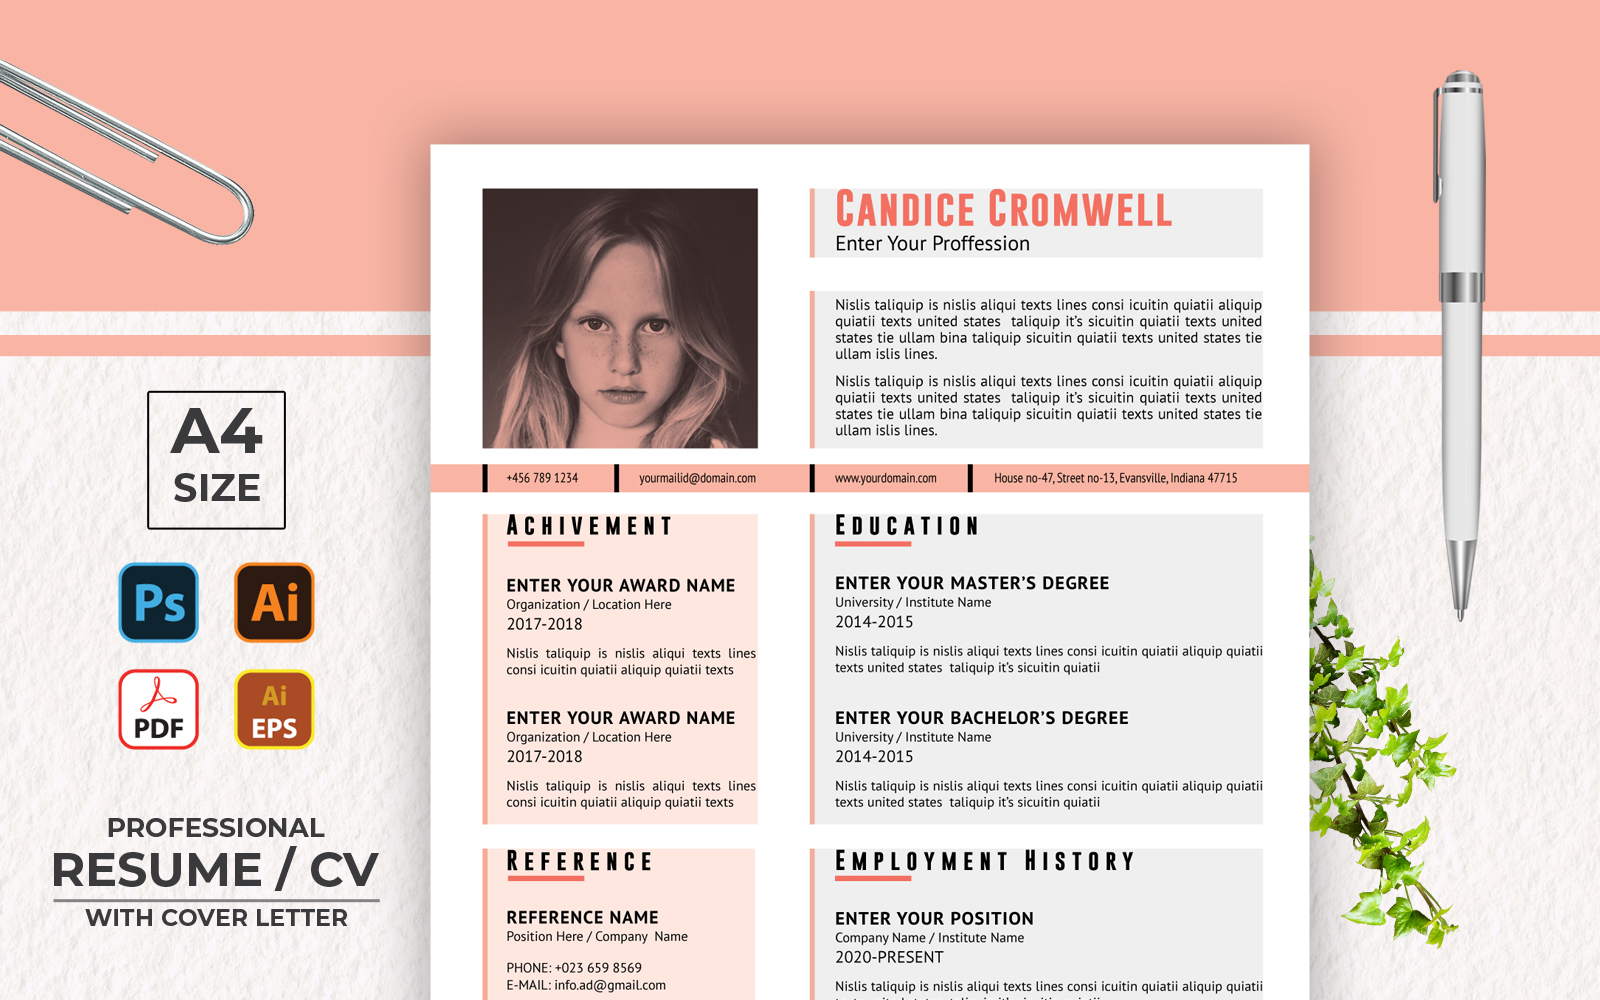 Candice Cromwell Resume Format CV Template